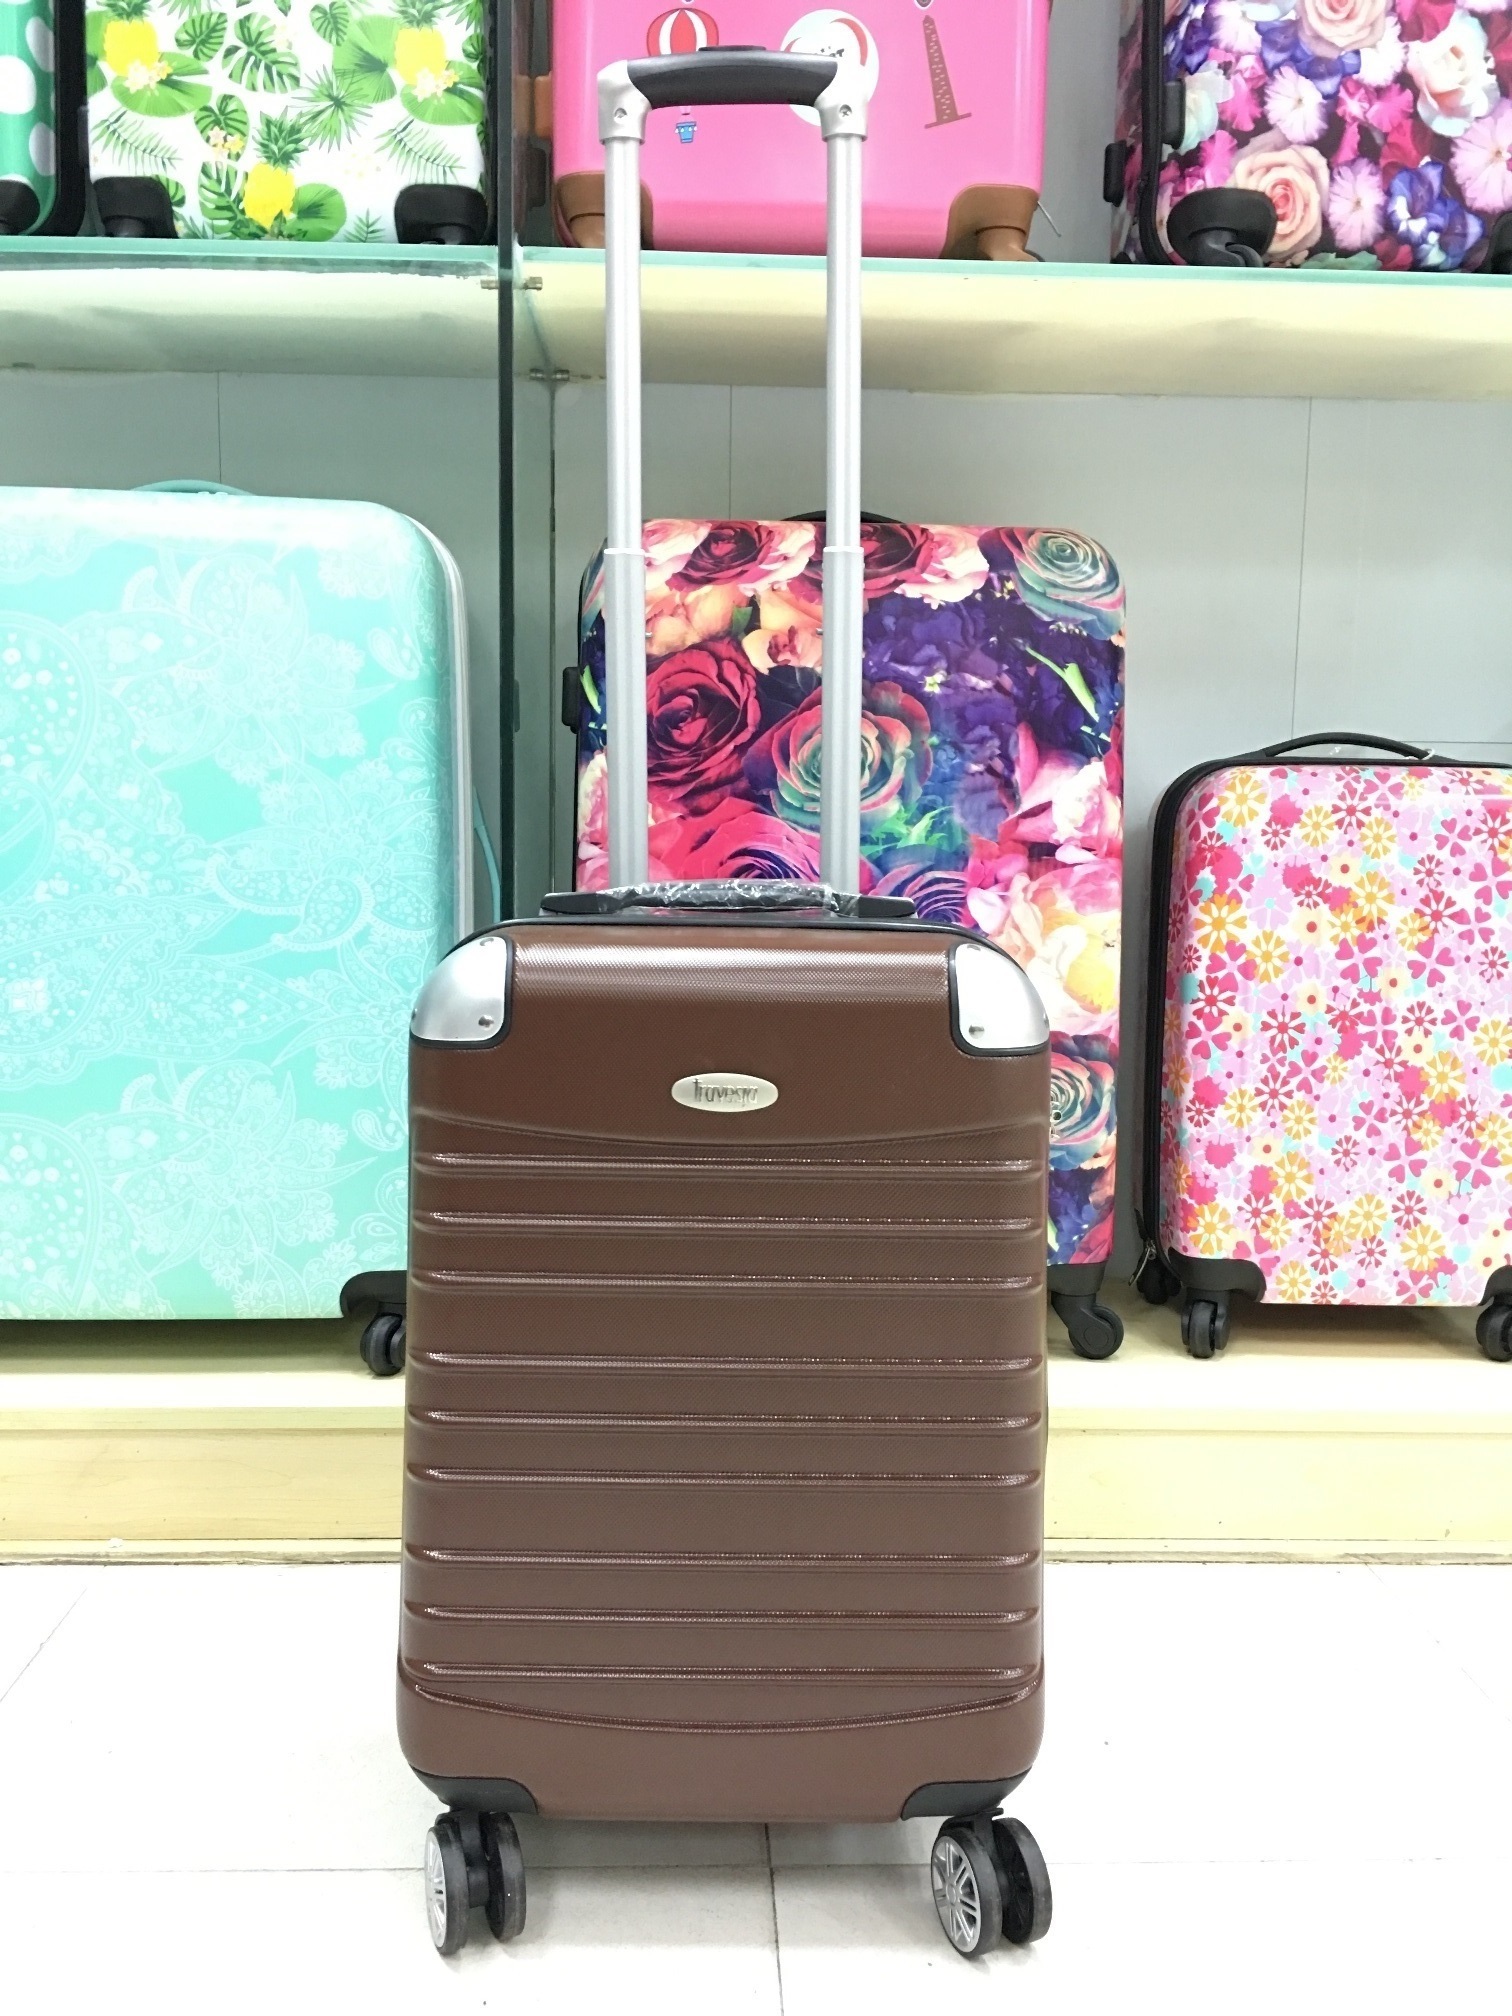 yanteng cheap carry on luggage in brown color